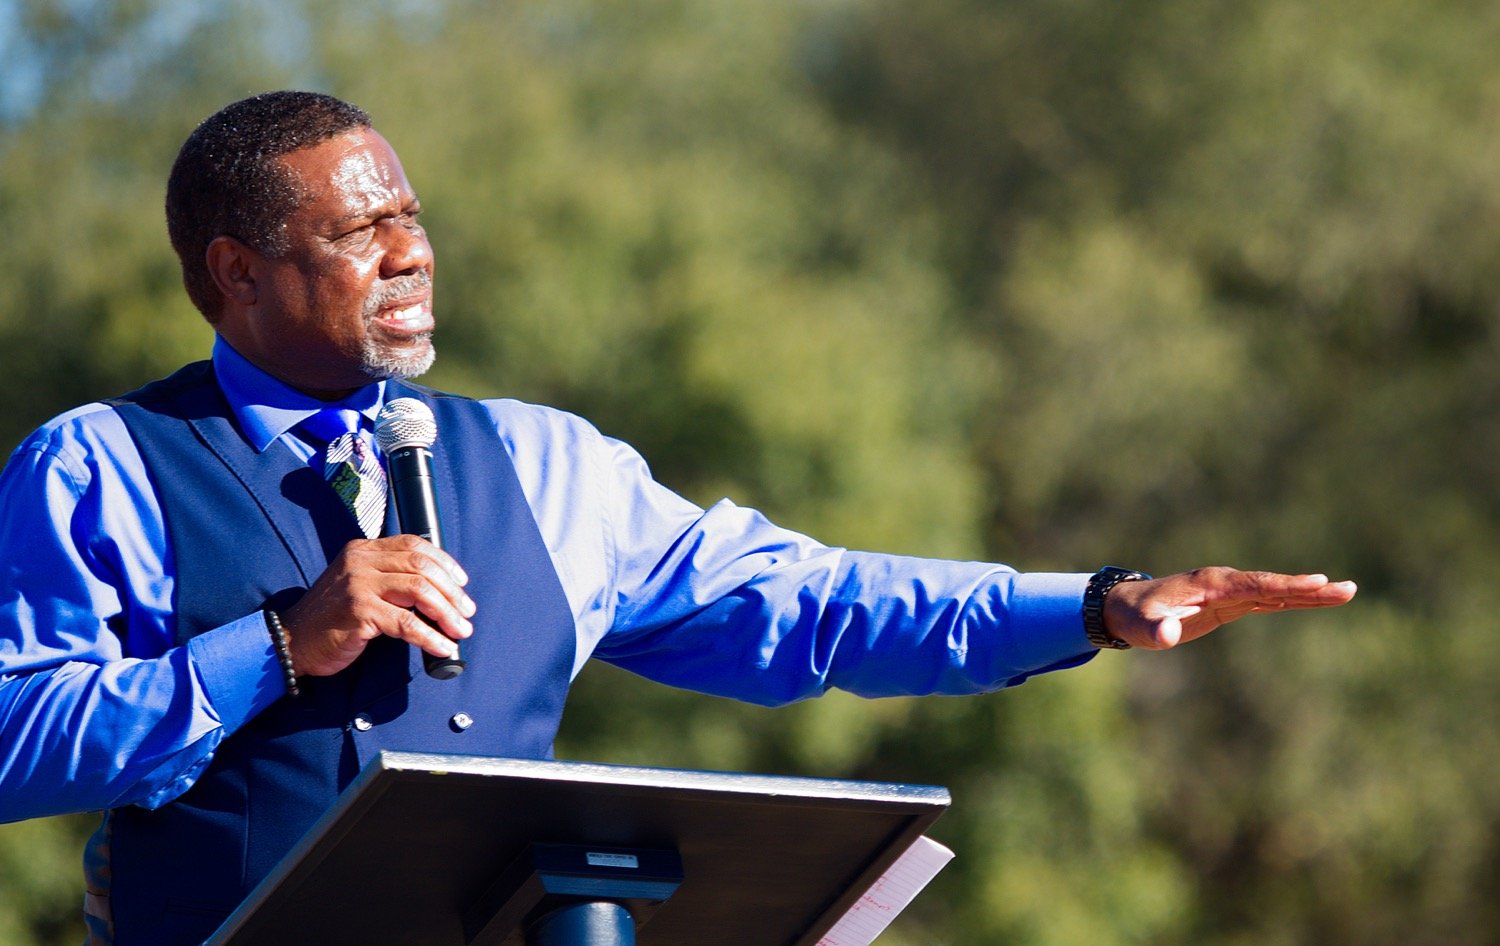 Keynote speaker Dr. Charles Brewster of the New Life Baptist Church in Quitman, drawing from Psalms 133, said unity is strength, and when God’s people stand together in unity, that is what God wants and what Satan dreads. [see more speakers and singers]